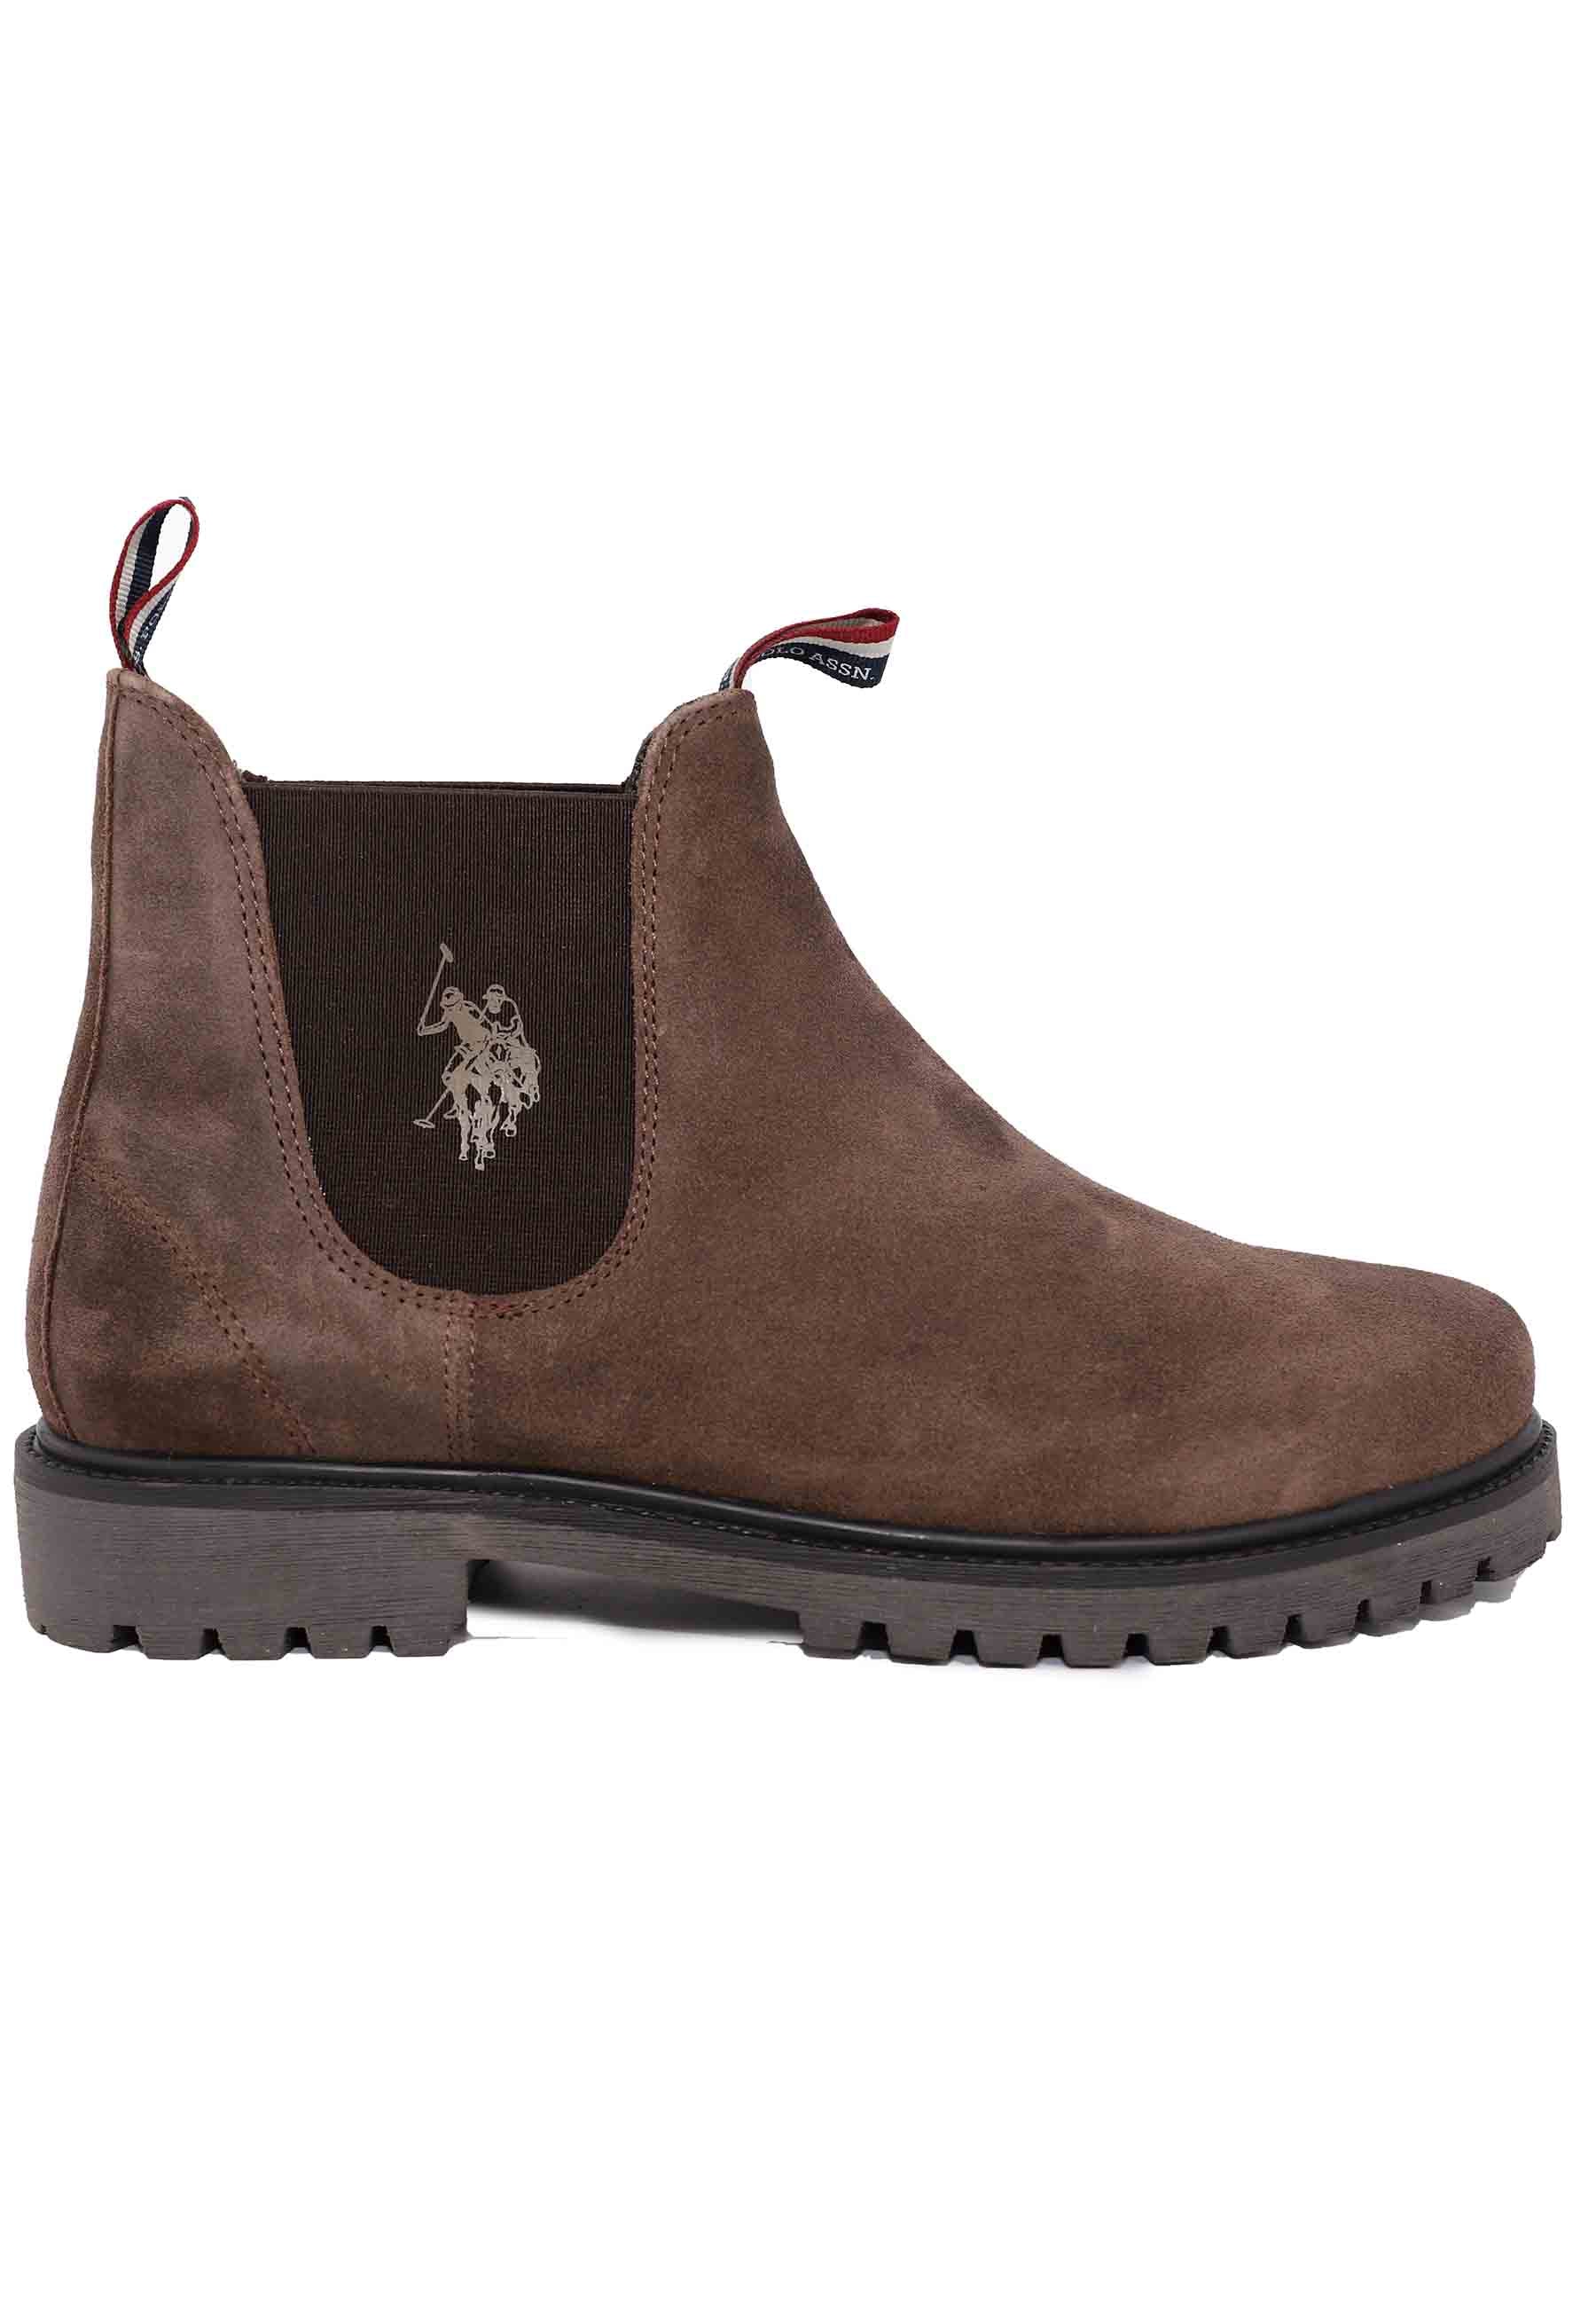 Men's ankle boots in brown suede with lug sole